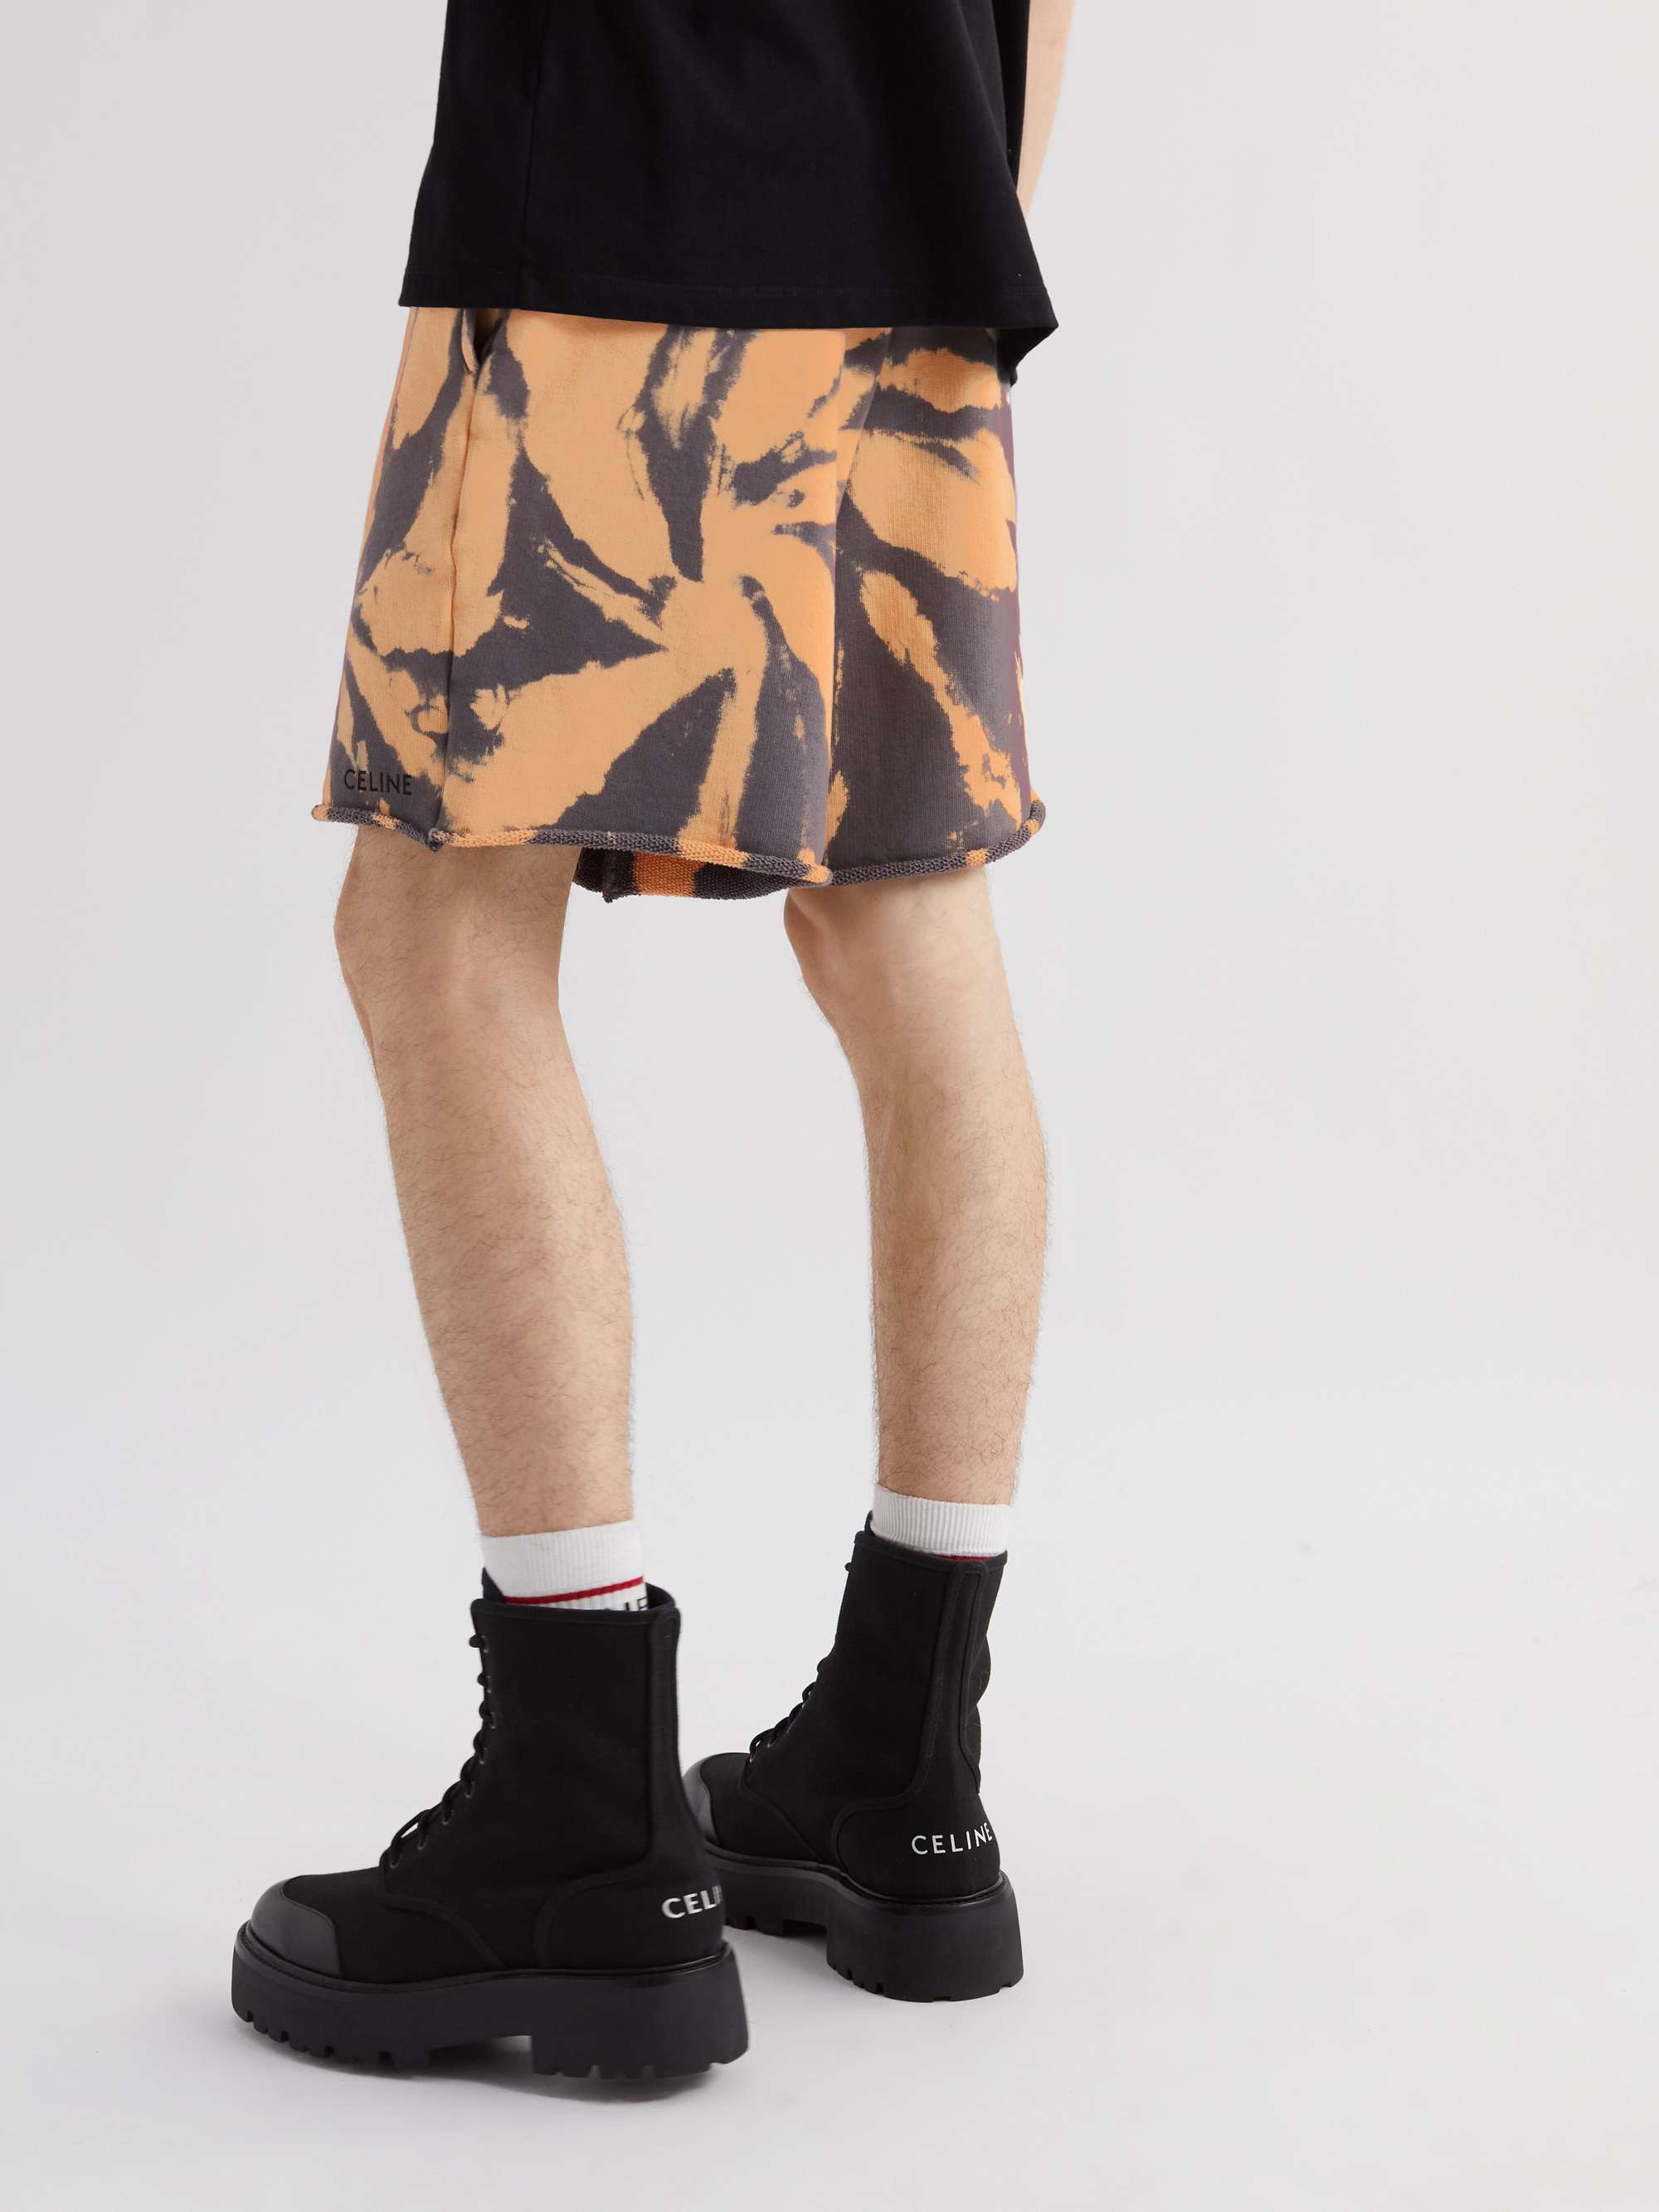 CELINE HOMME Tie-Dyed Cotton-Jersey Drawstring Shorts